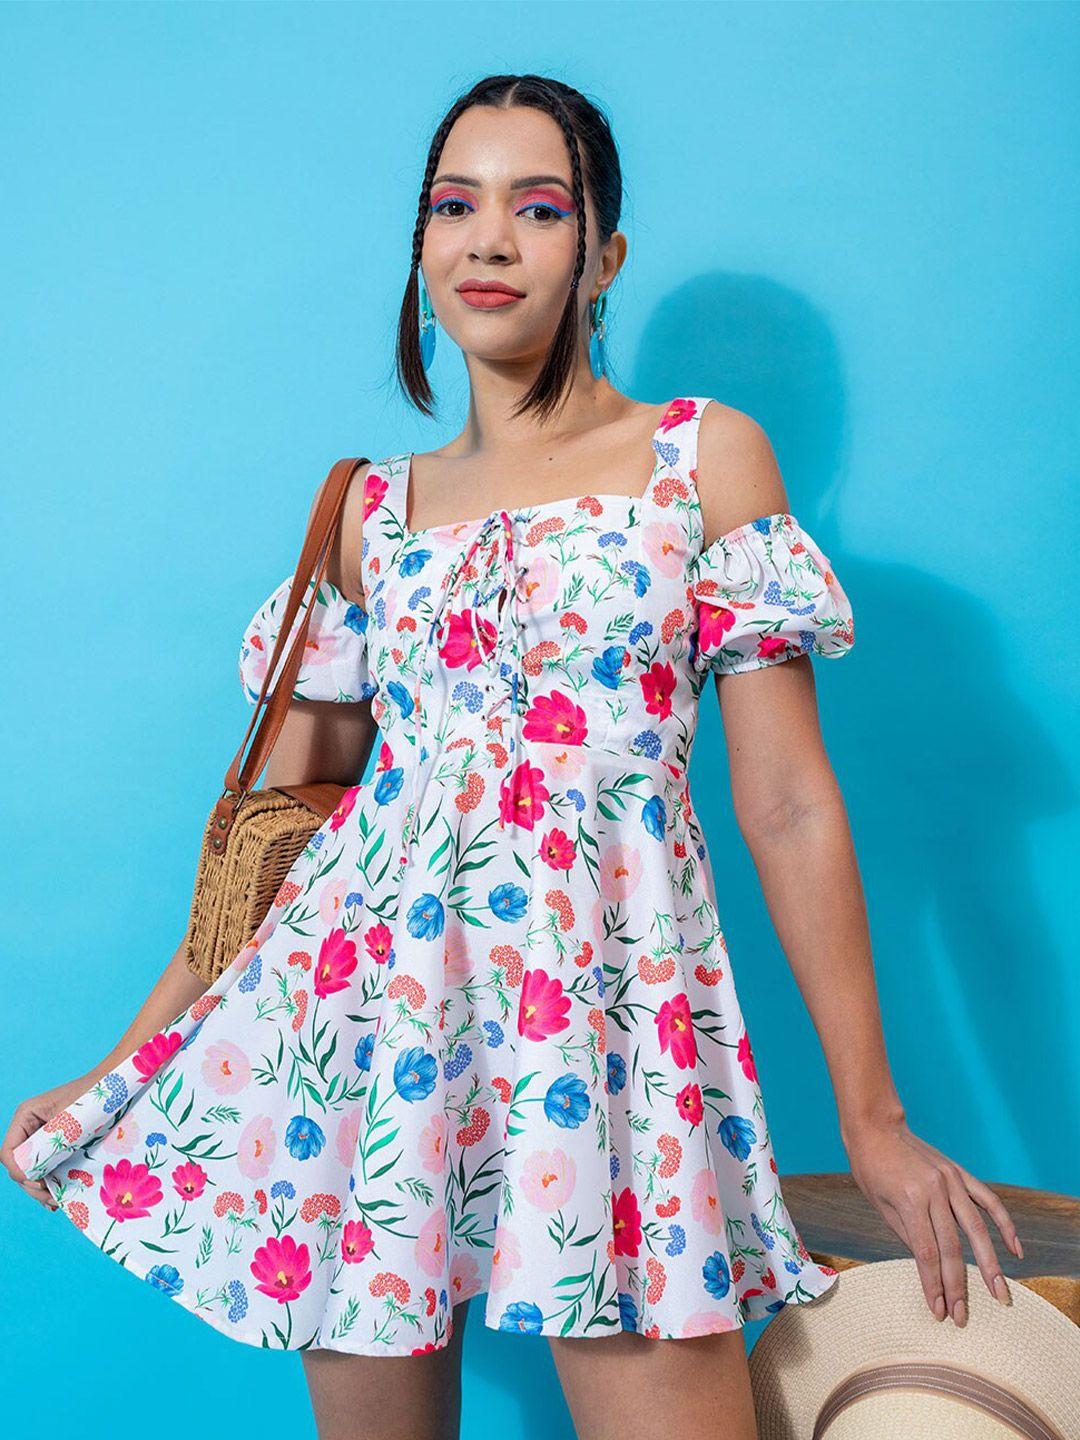 stylecast x hersheinbox white & pink floral printed fit & flare mini dress